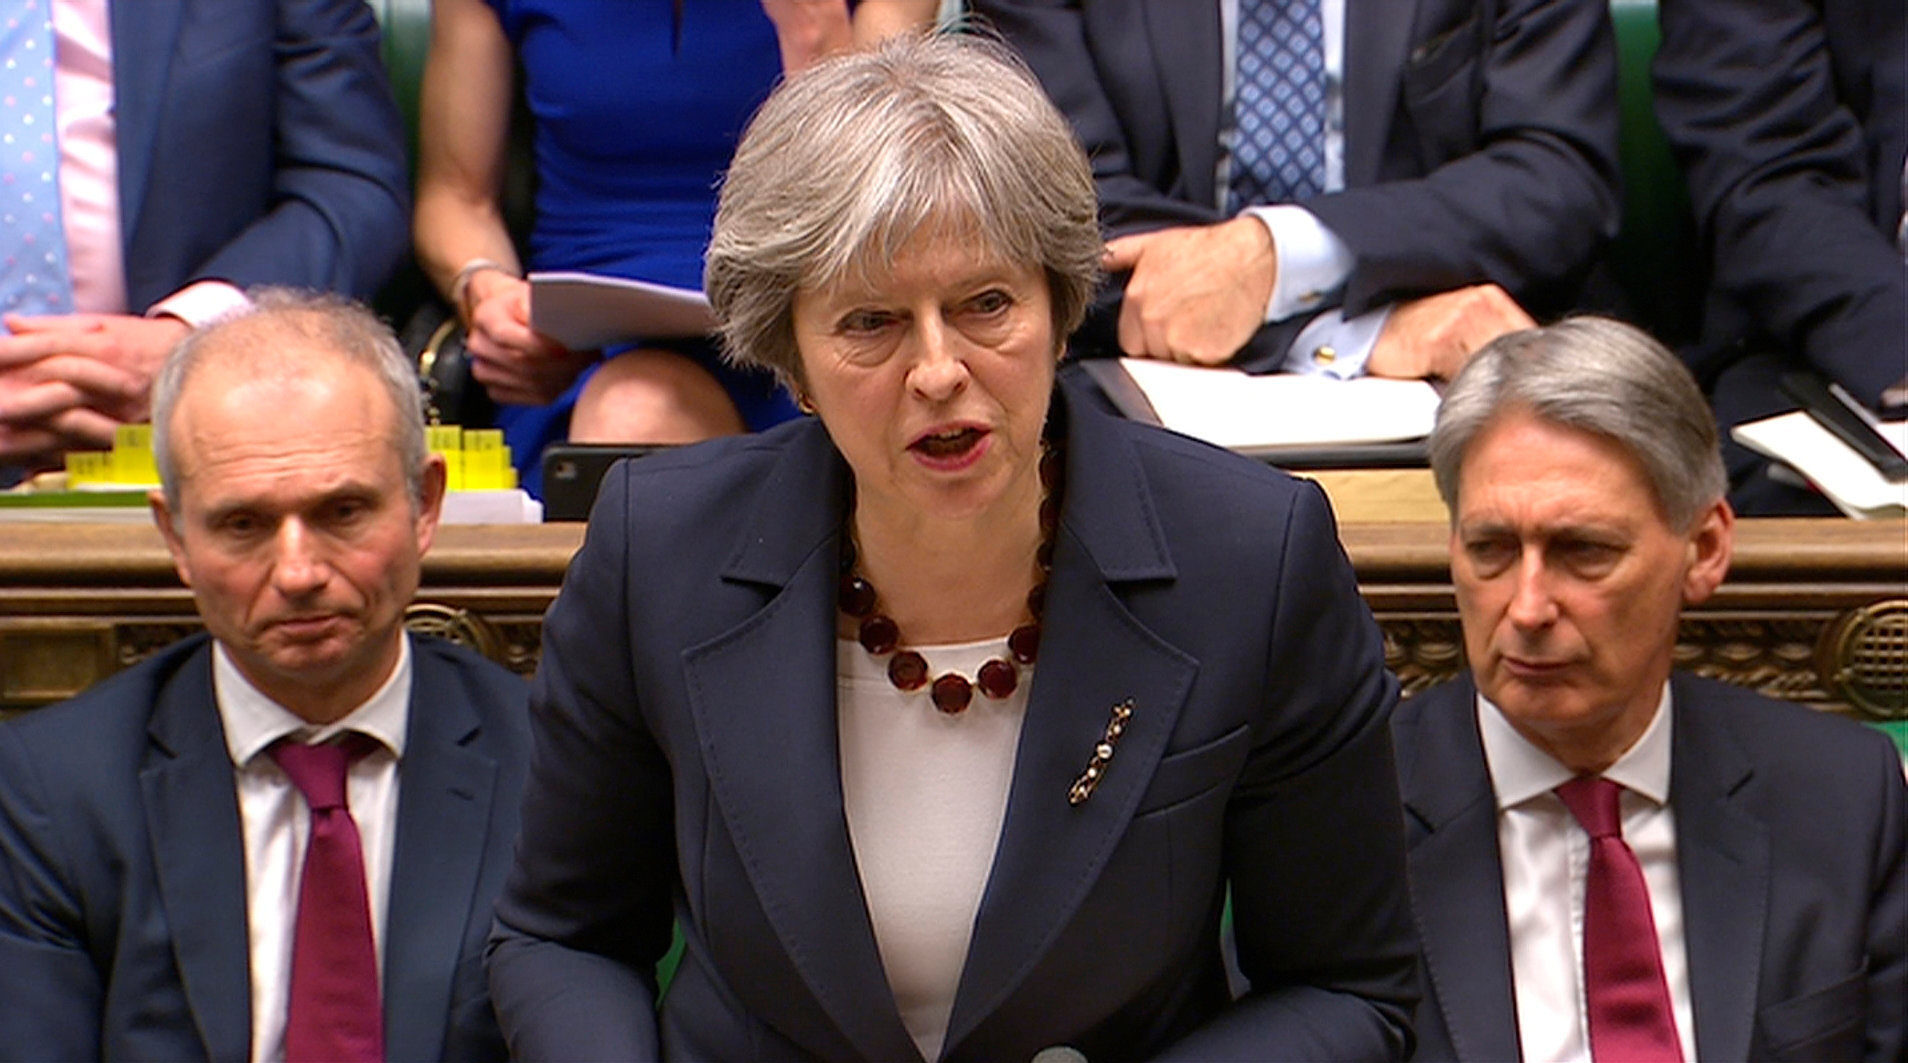  REUTERS/ Parliament TVBritain's Prime Minister Theresa May addresses the House of Commons on her government's reaction to the poisoning of former Russian intelligence officer Sergei Skripal and his daughter Yulia in Salisbury, in London, March 14, 2018